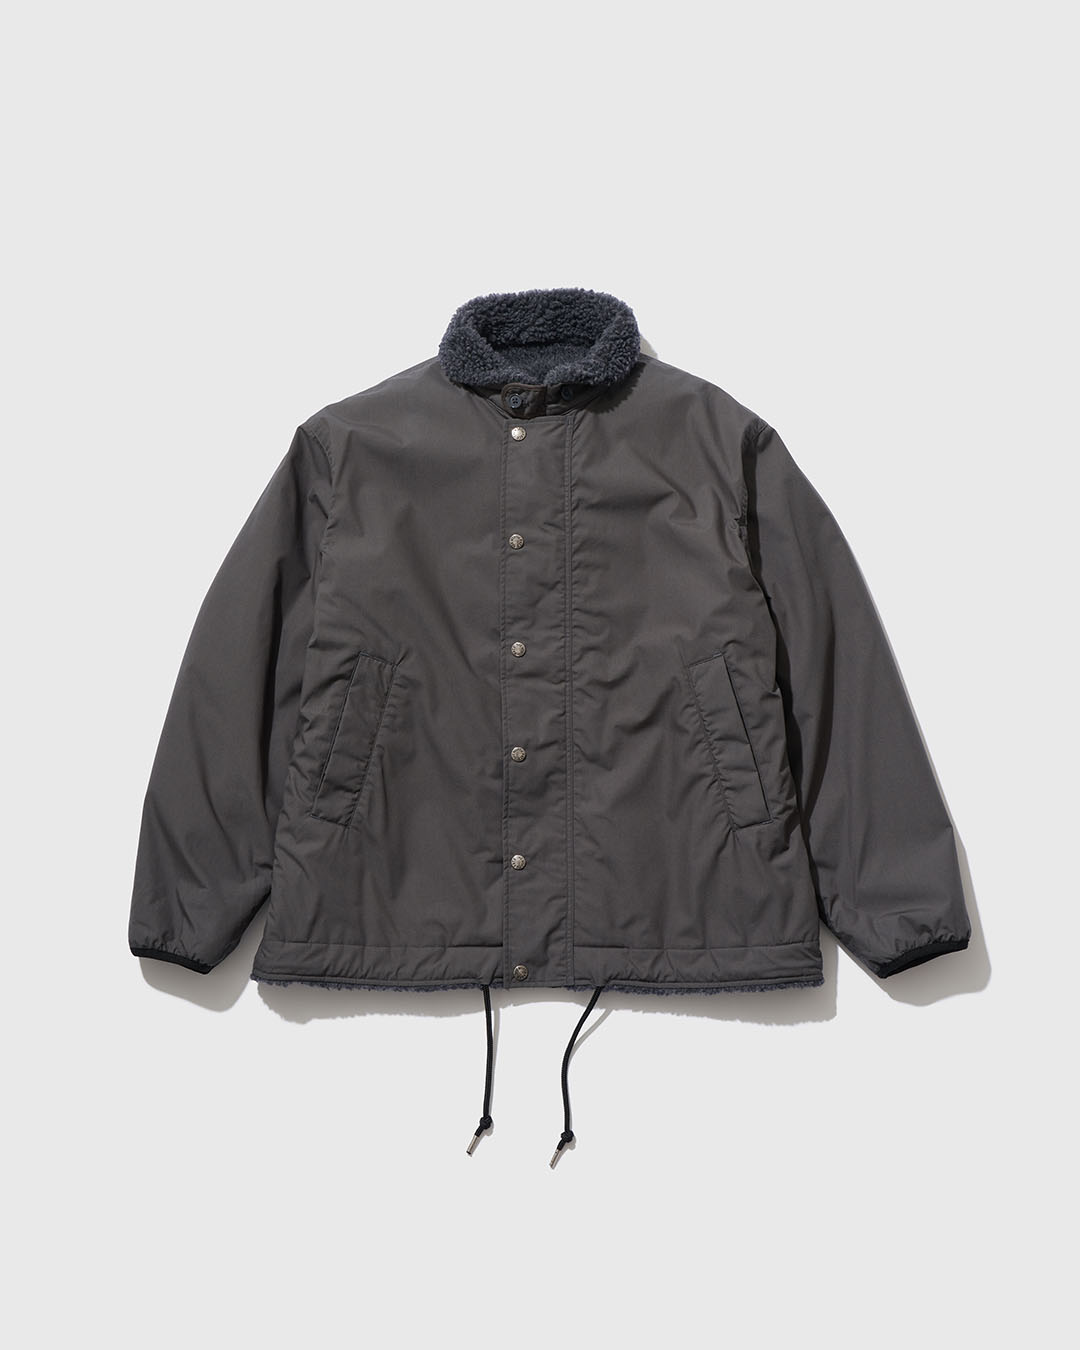 nanamica / THE NORTH FACE PURPLE LABEL / Featured Product vol.60